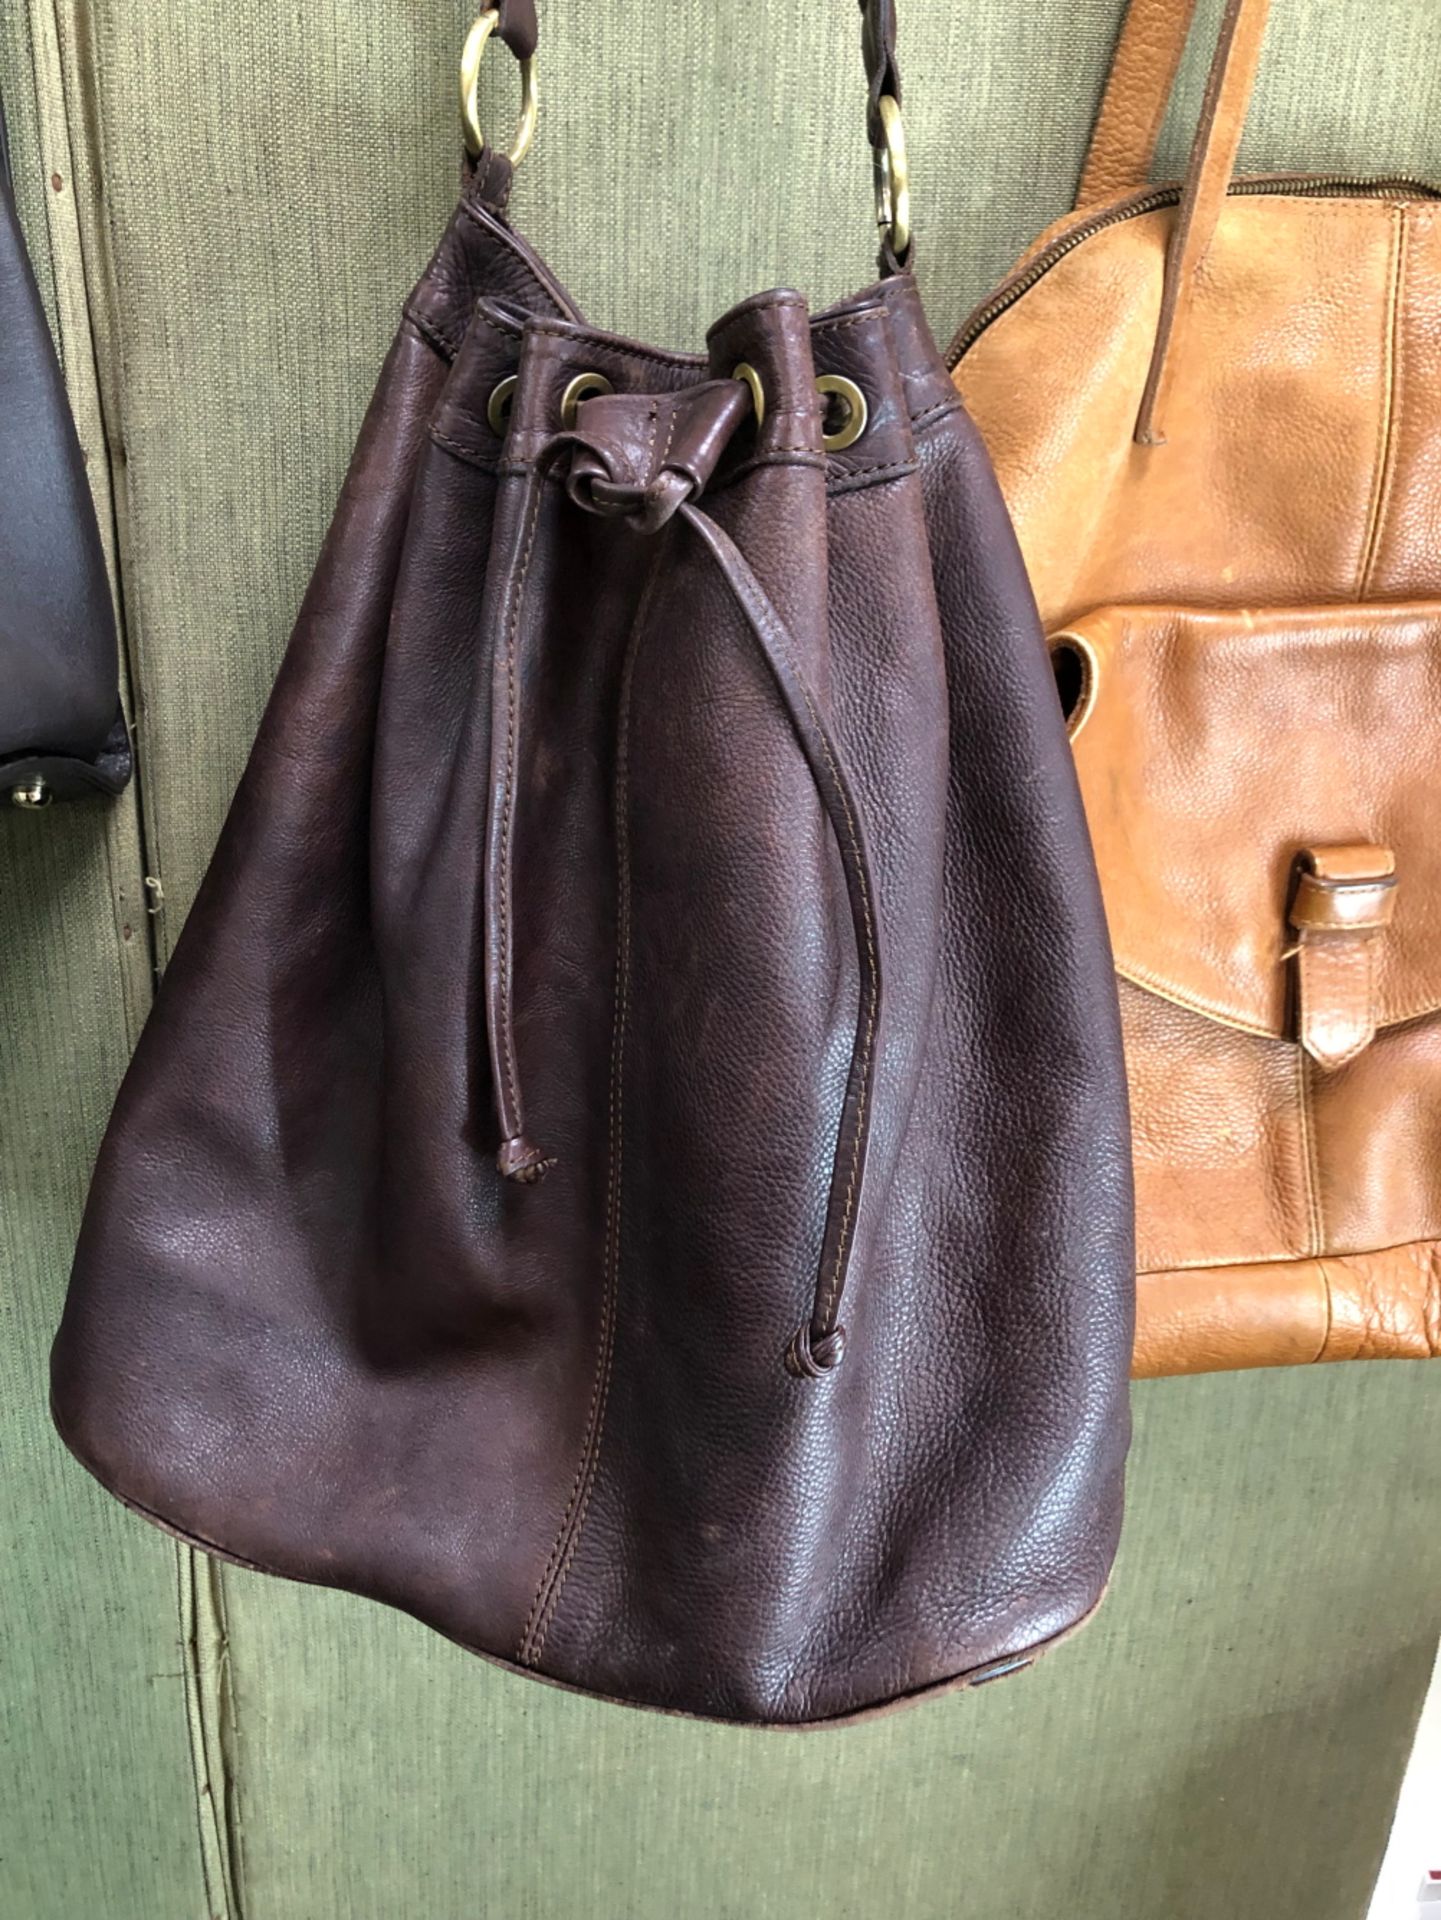 A ZARA WOMAN LARGE BROWN HANDBAG W 45cm, TOGETHER WITH A DARK BROWN LEATHER PAUL COSTELLOE BAG, A - Image 5 of 11